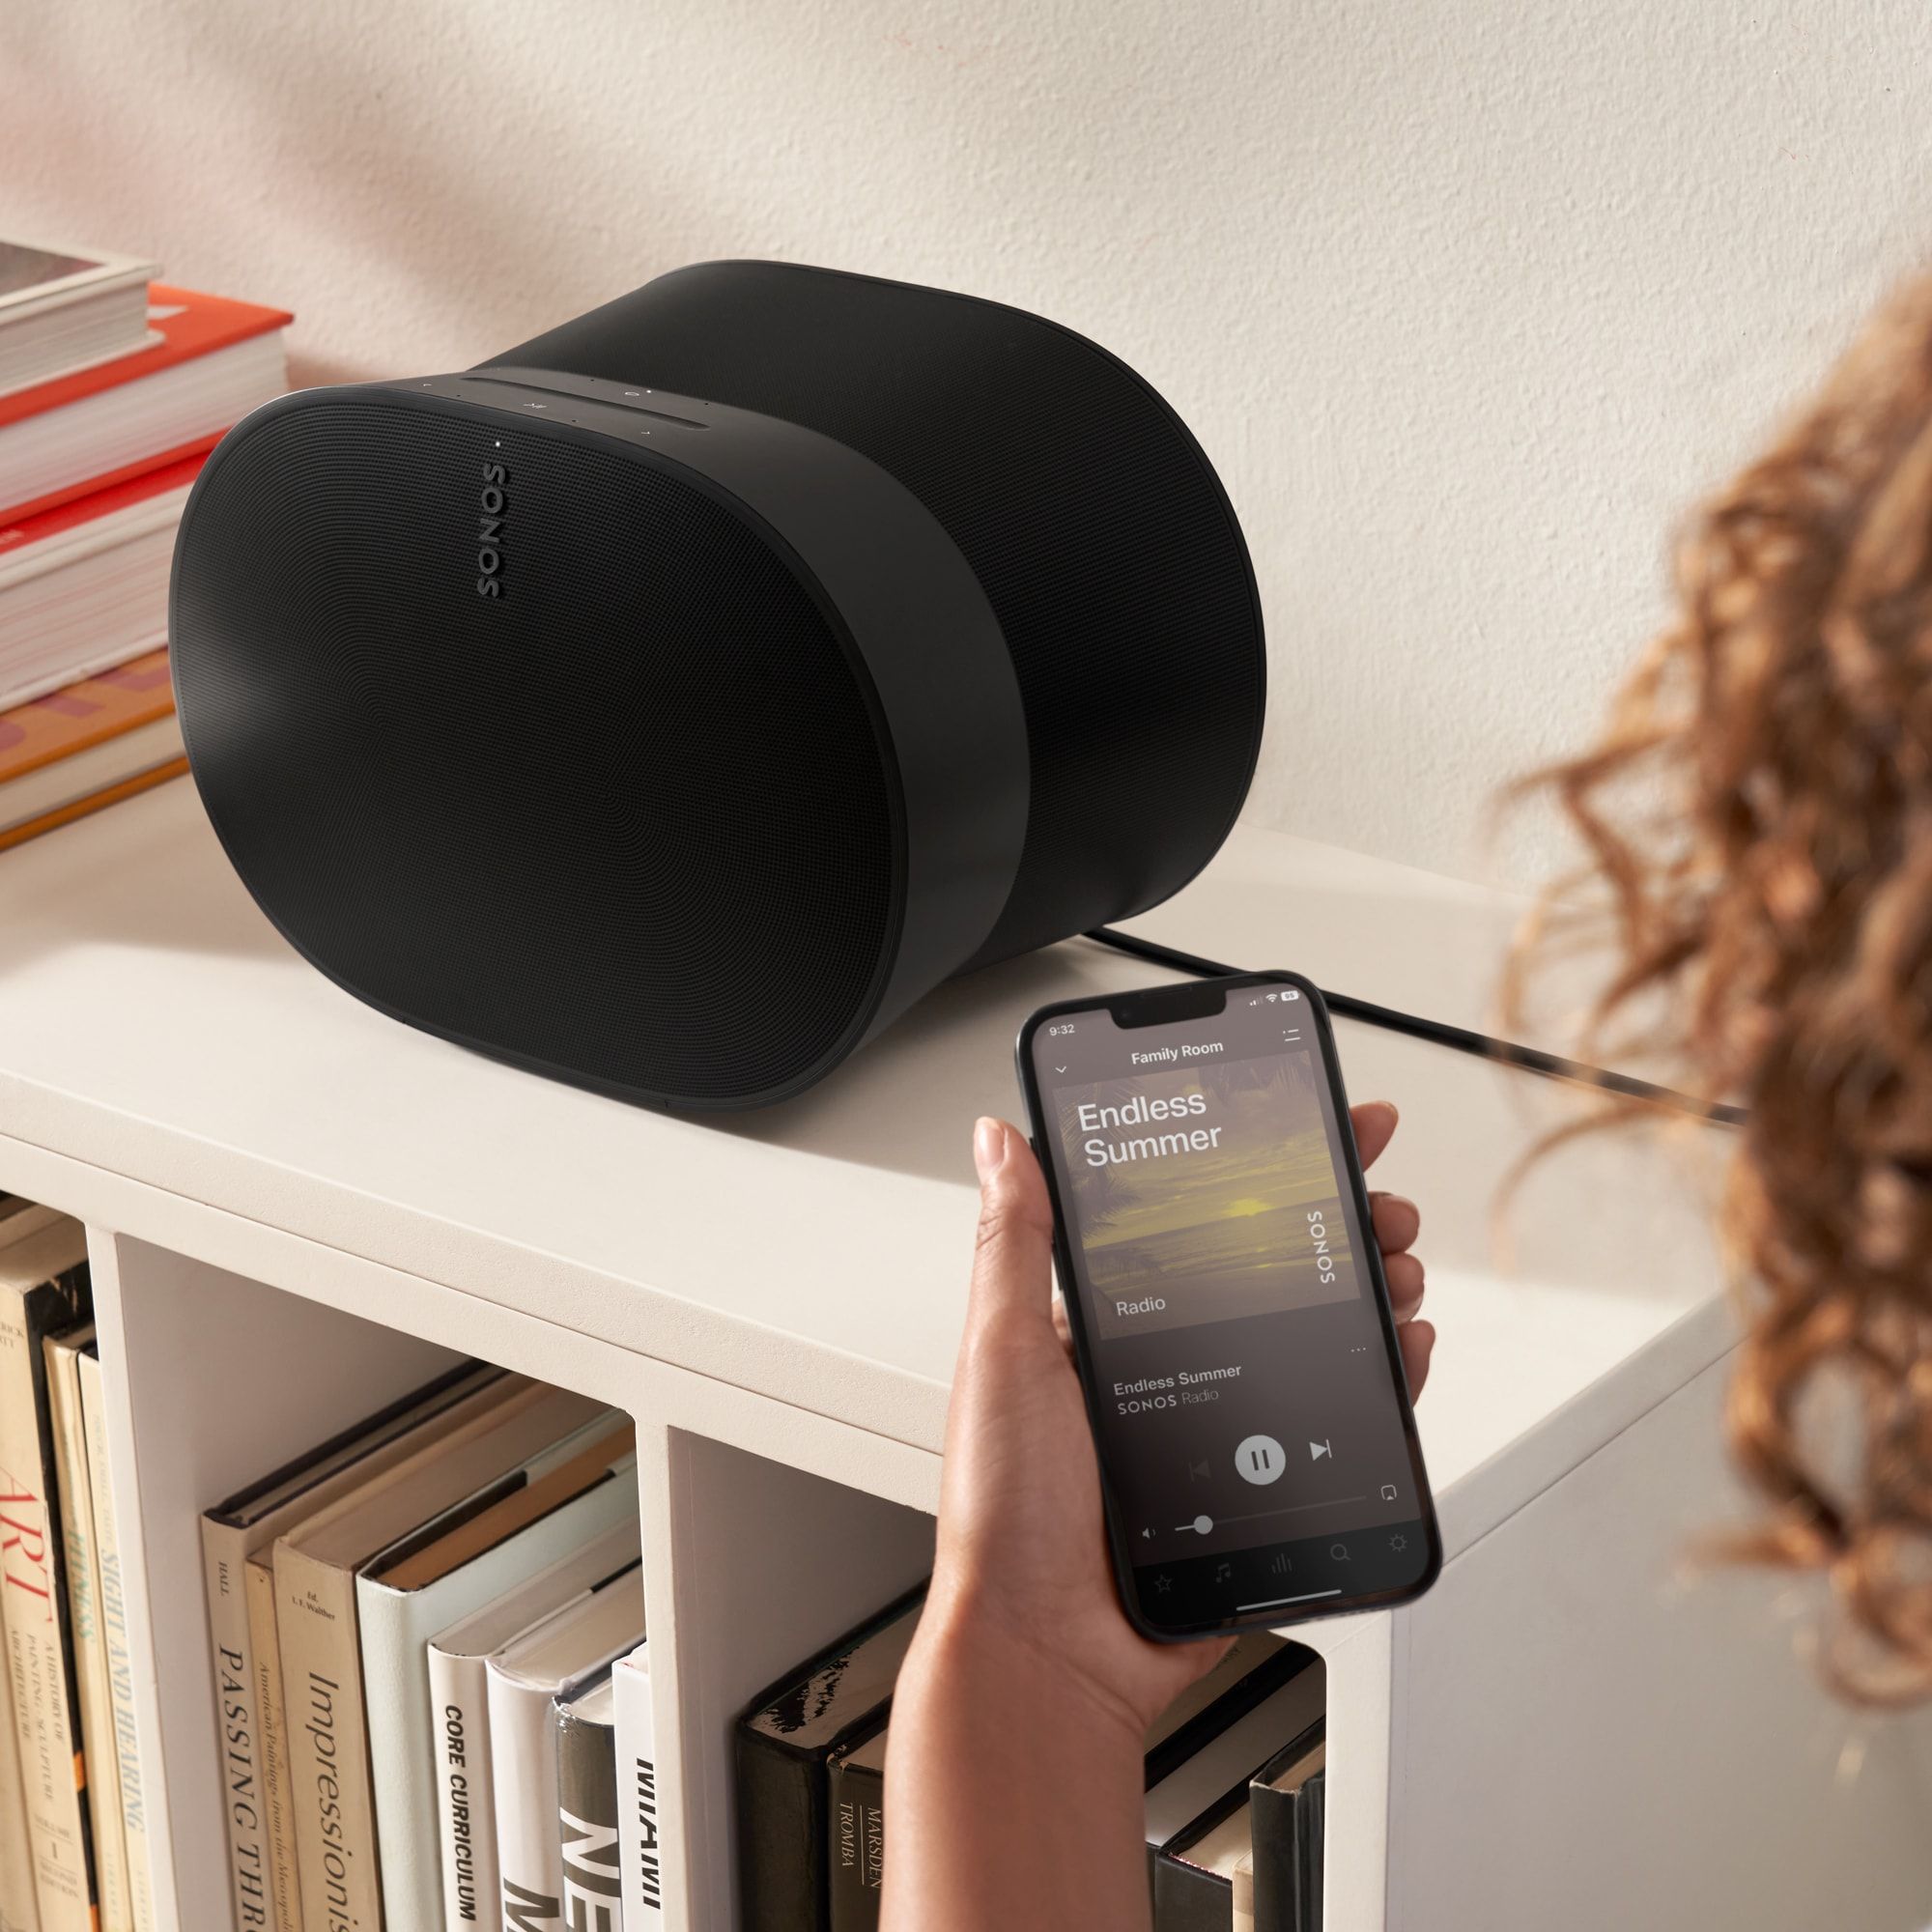 Compare Speakers & Features | Sonos Official Website